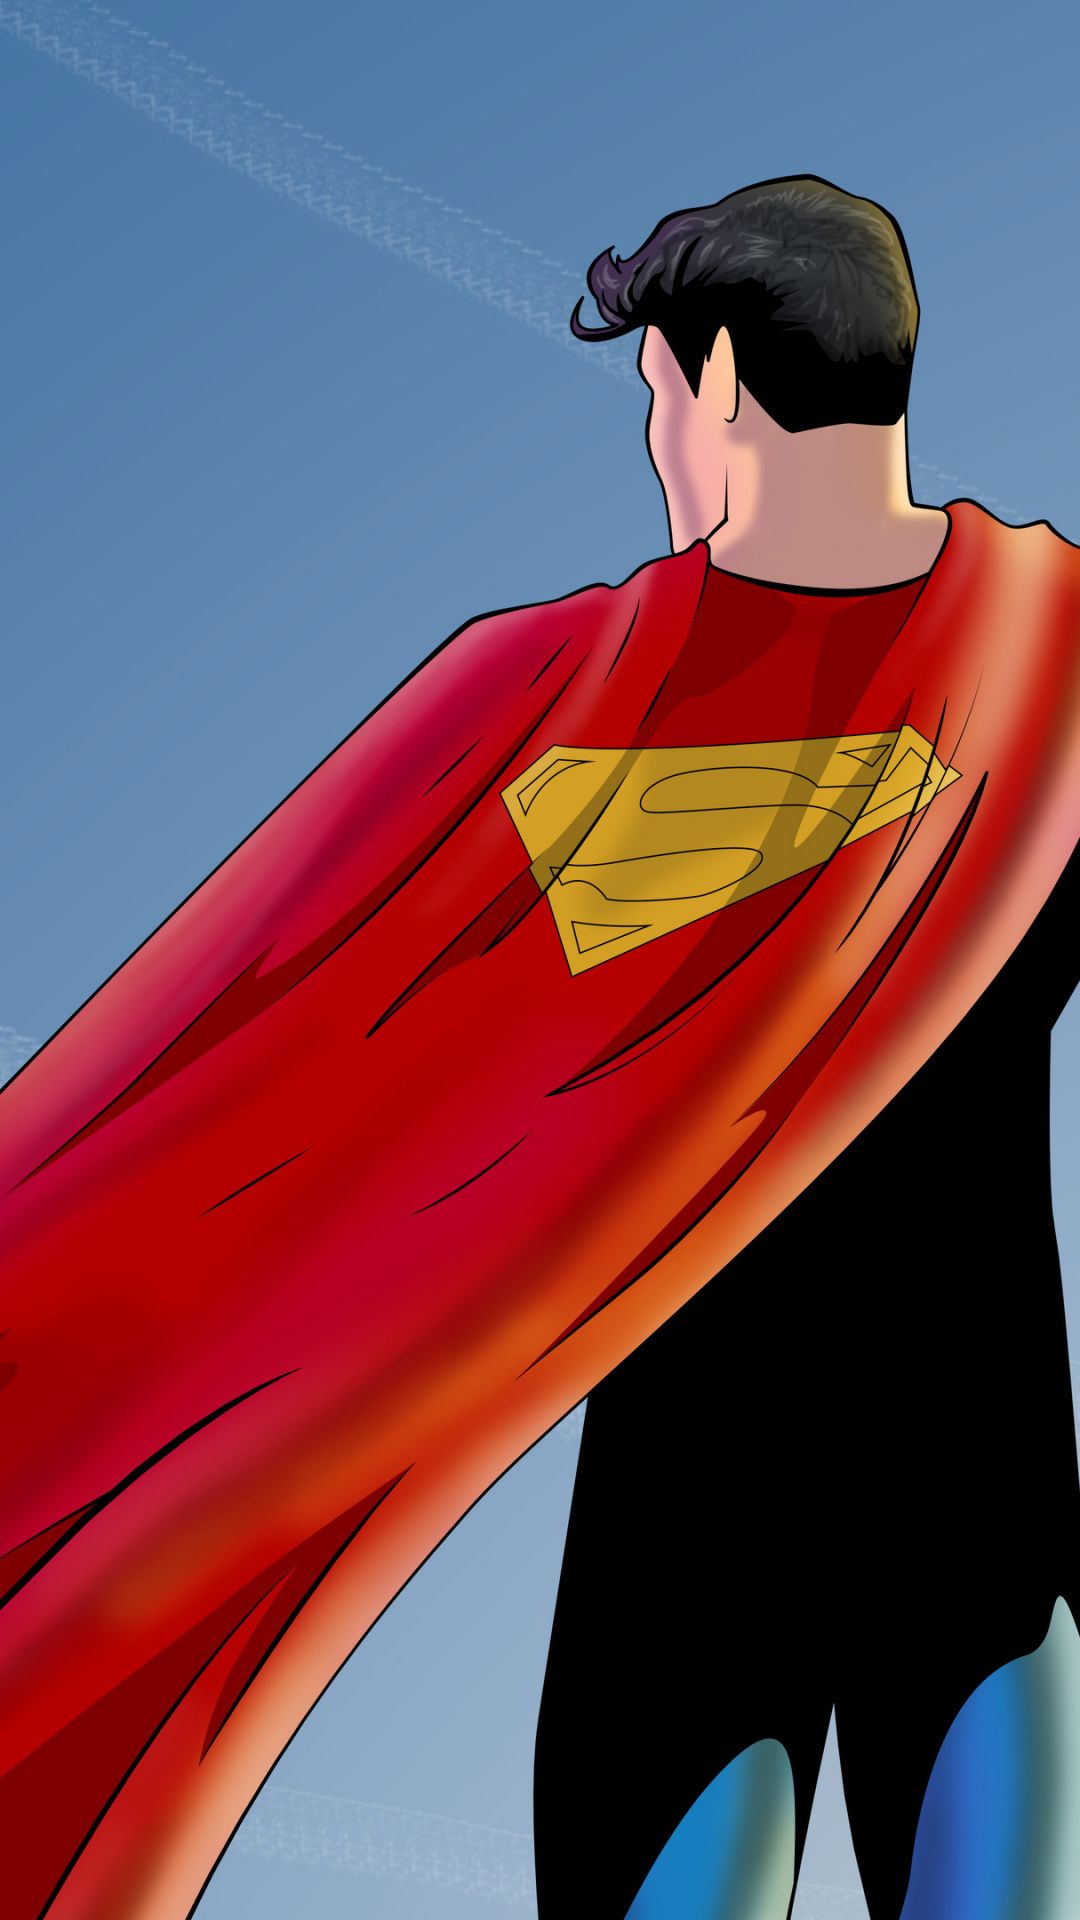 Superman wallpaper for my phone